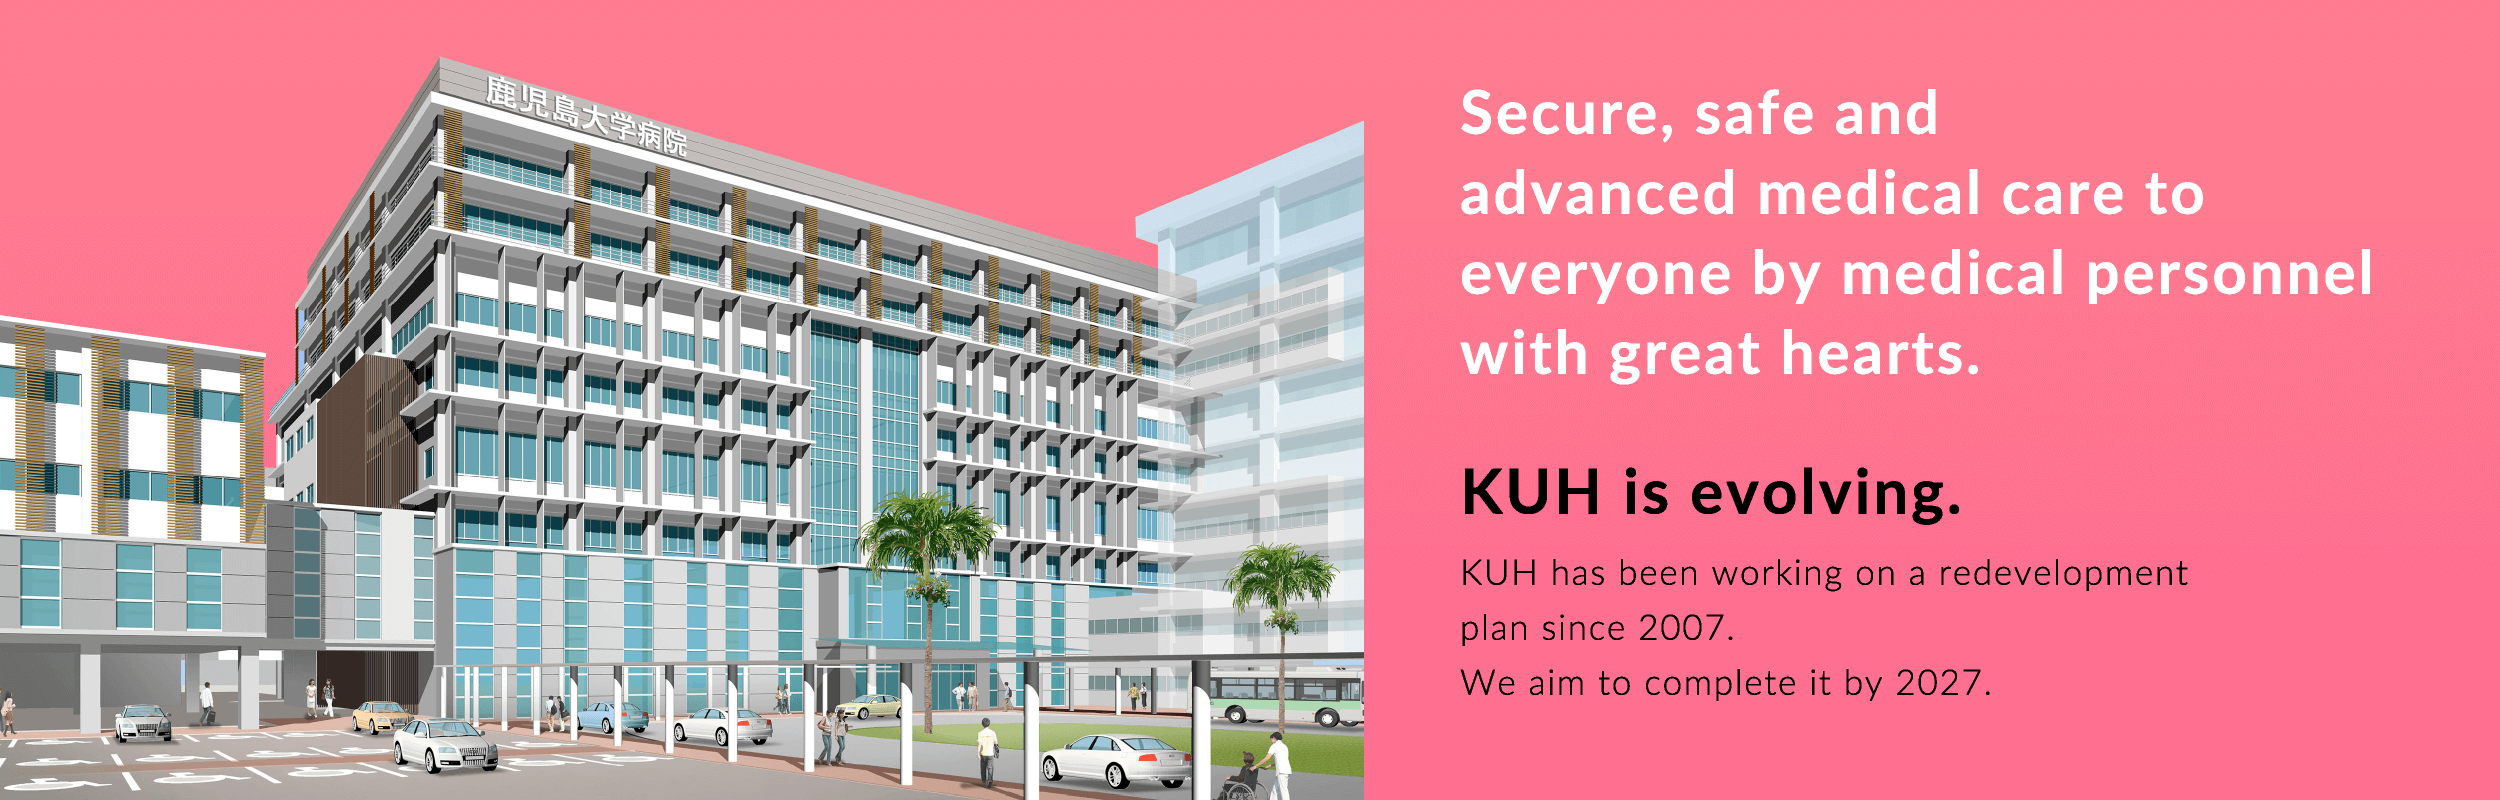 Secure, safe and advanced medical care to everyone by medical personnel with great hearts.KUH is evolving.